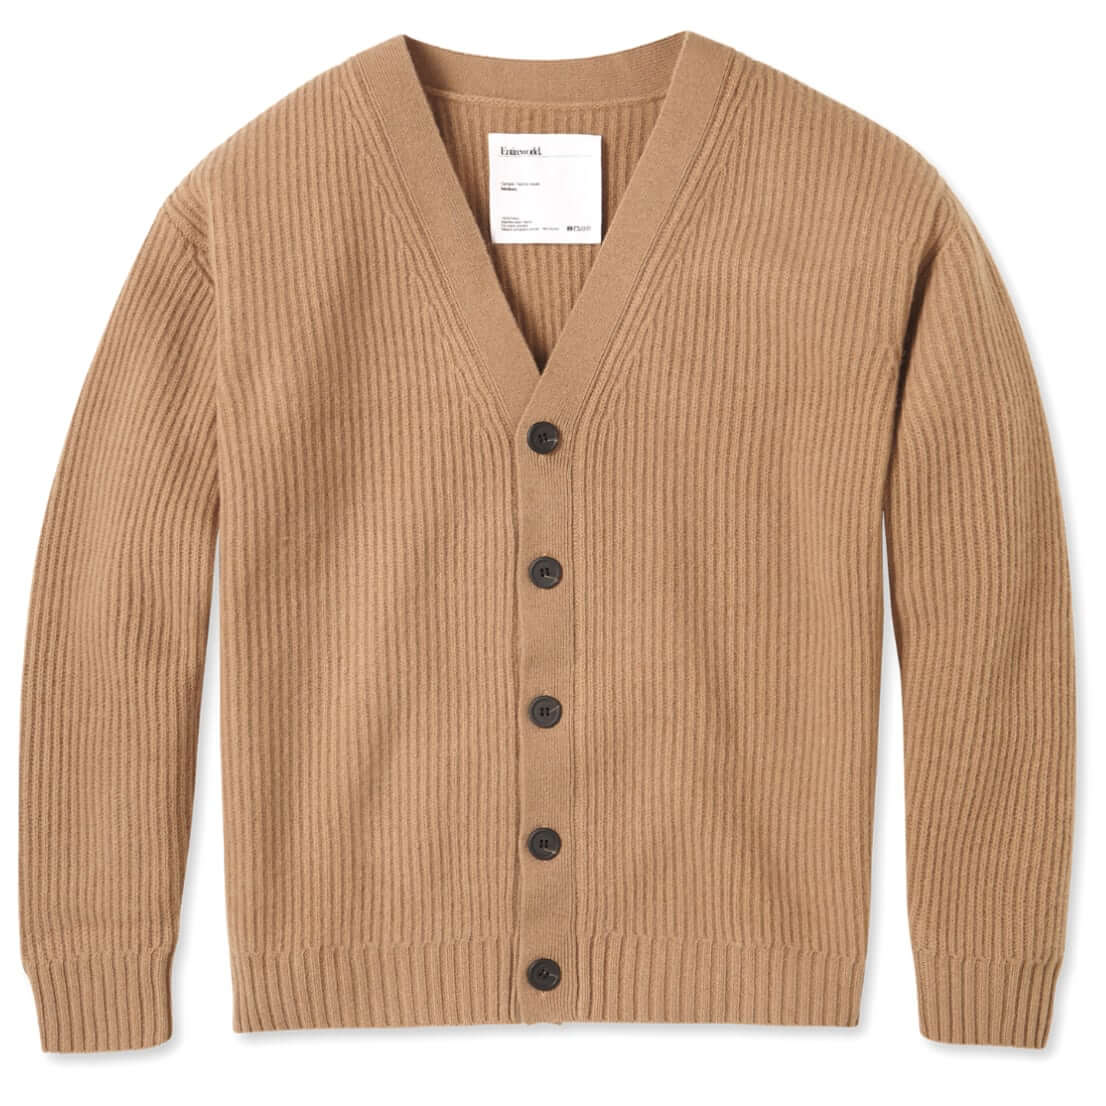 Add a Layer of Cool - Best Men's Cardigans in 2021 | Valet.